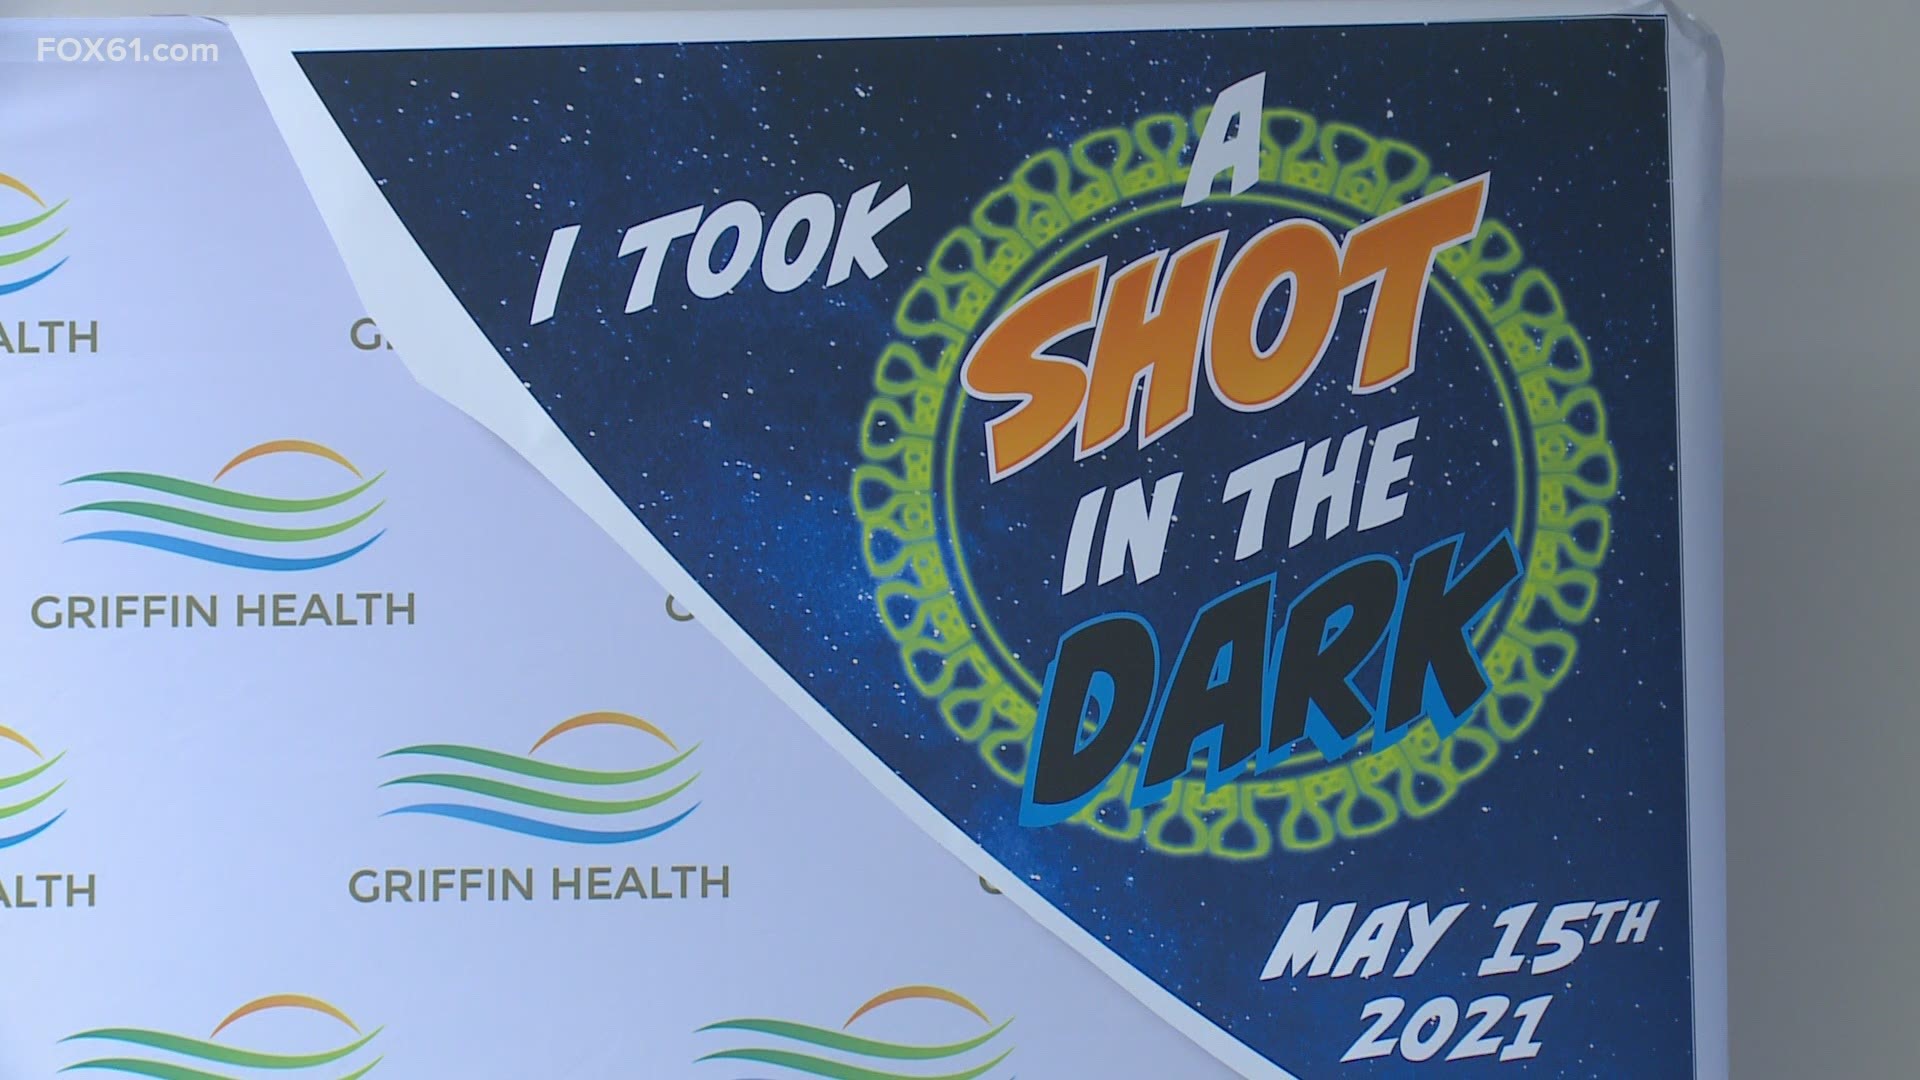 The outdoor 'vaccination celebration' was put on by Griffin Health.